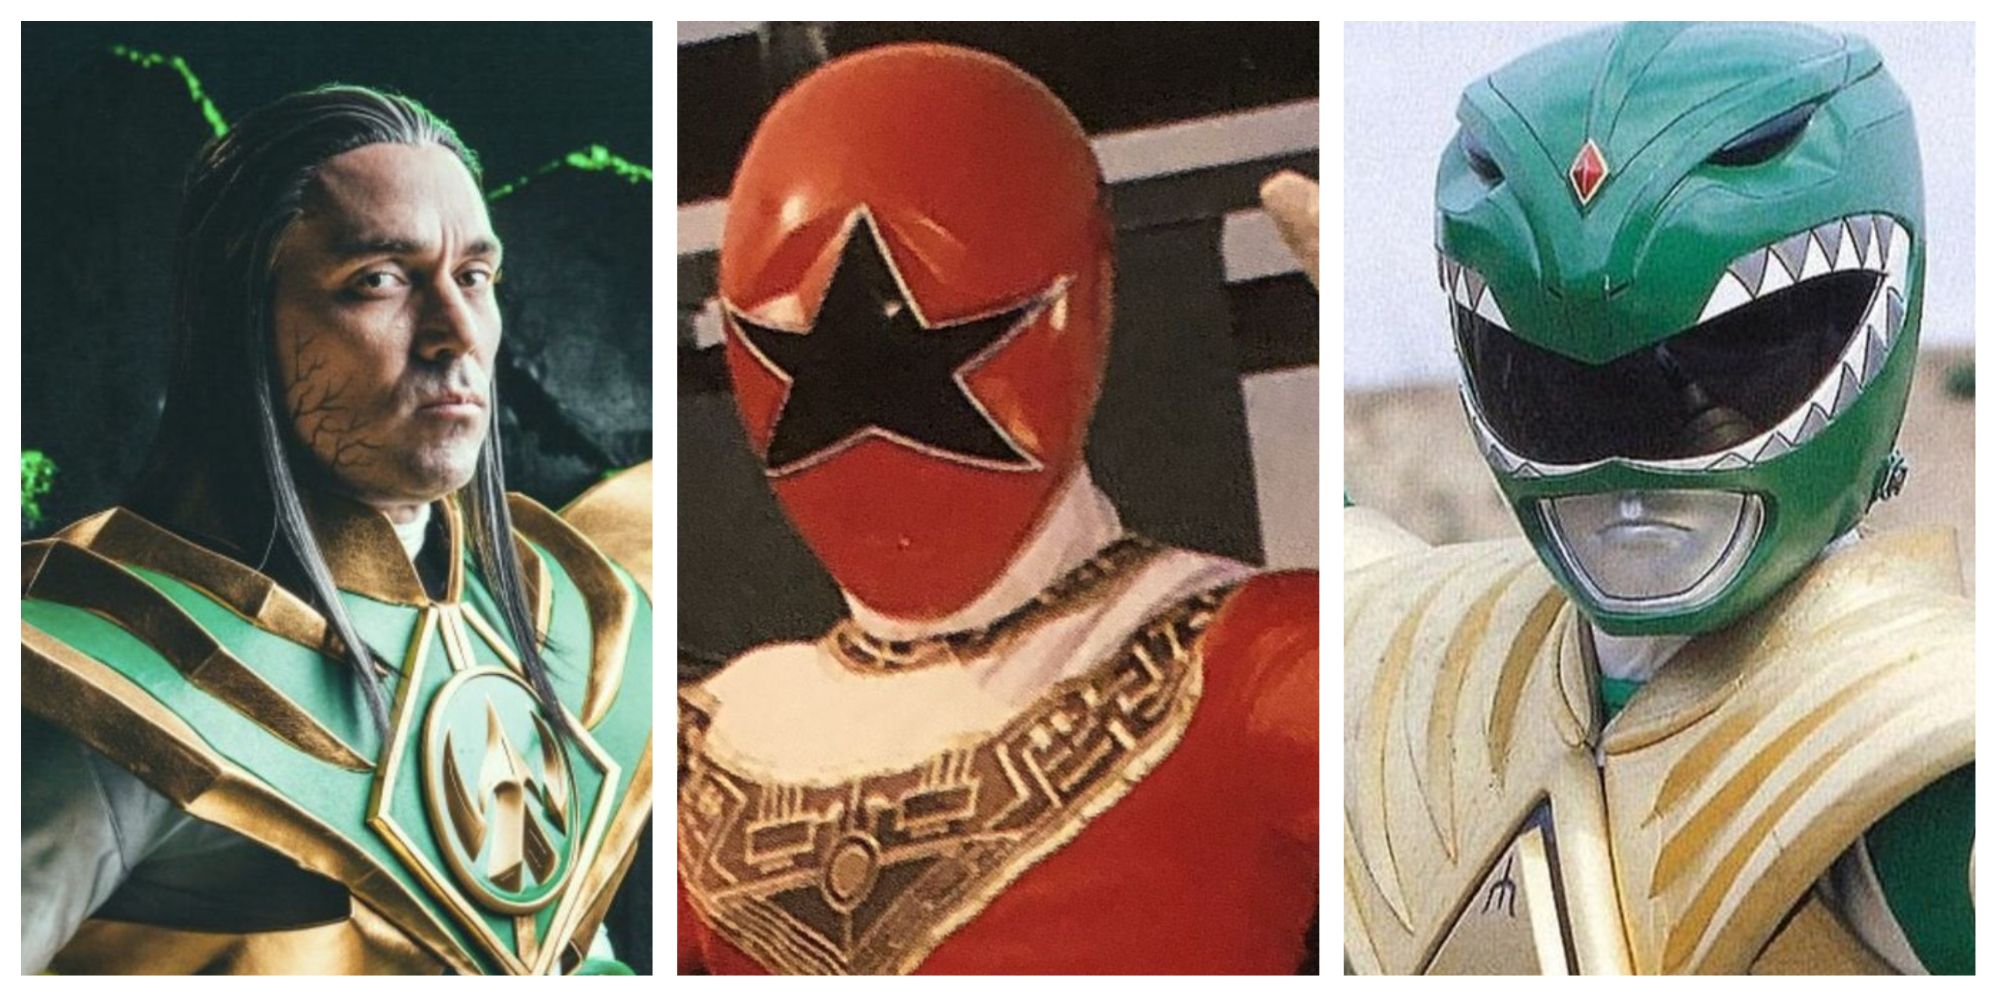 Left: Jason David Frank as Lord Drakkon. Middle: The Red Ranger from Power Rangers Zeo. Right: The Green Ranger from Mighty Morphin Power Rangers.